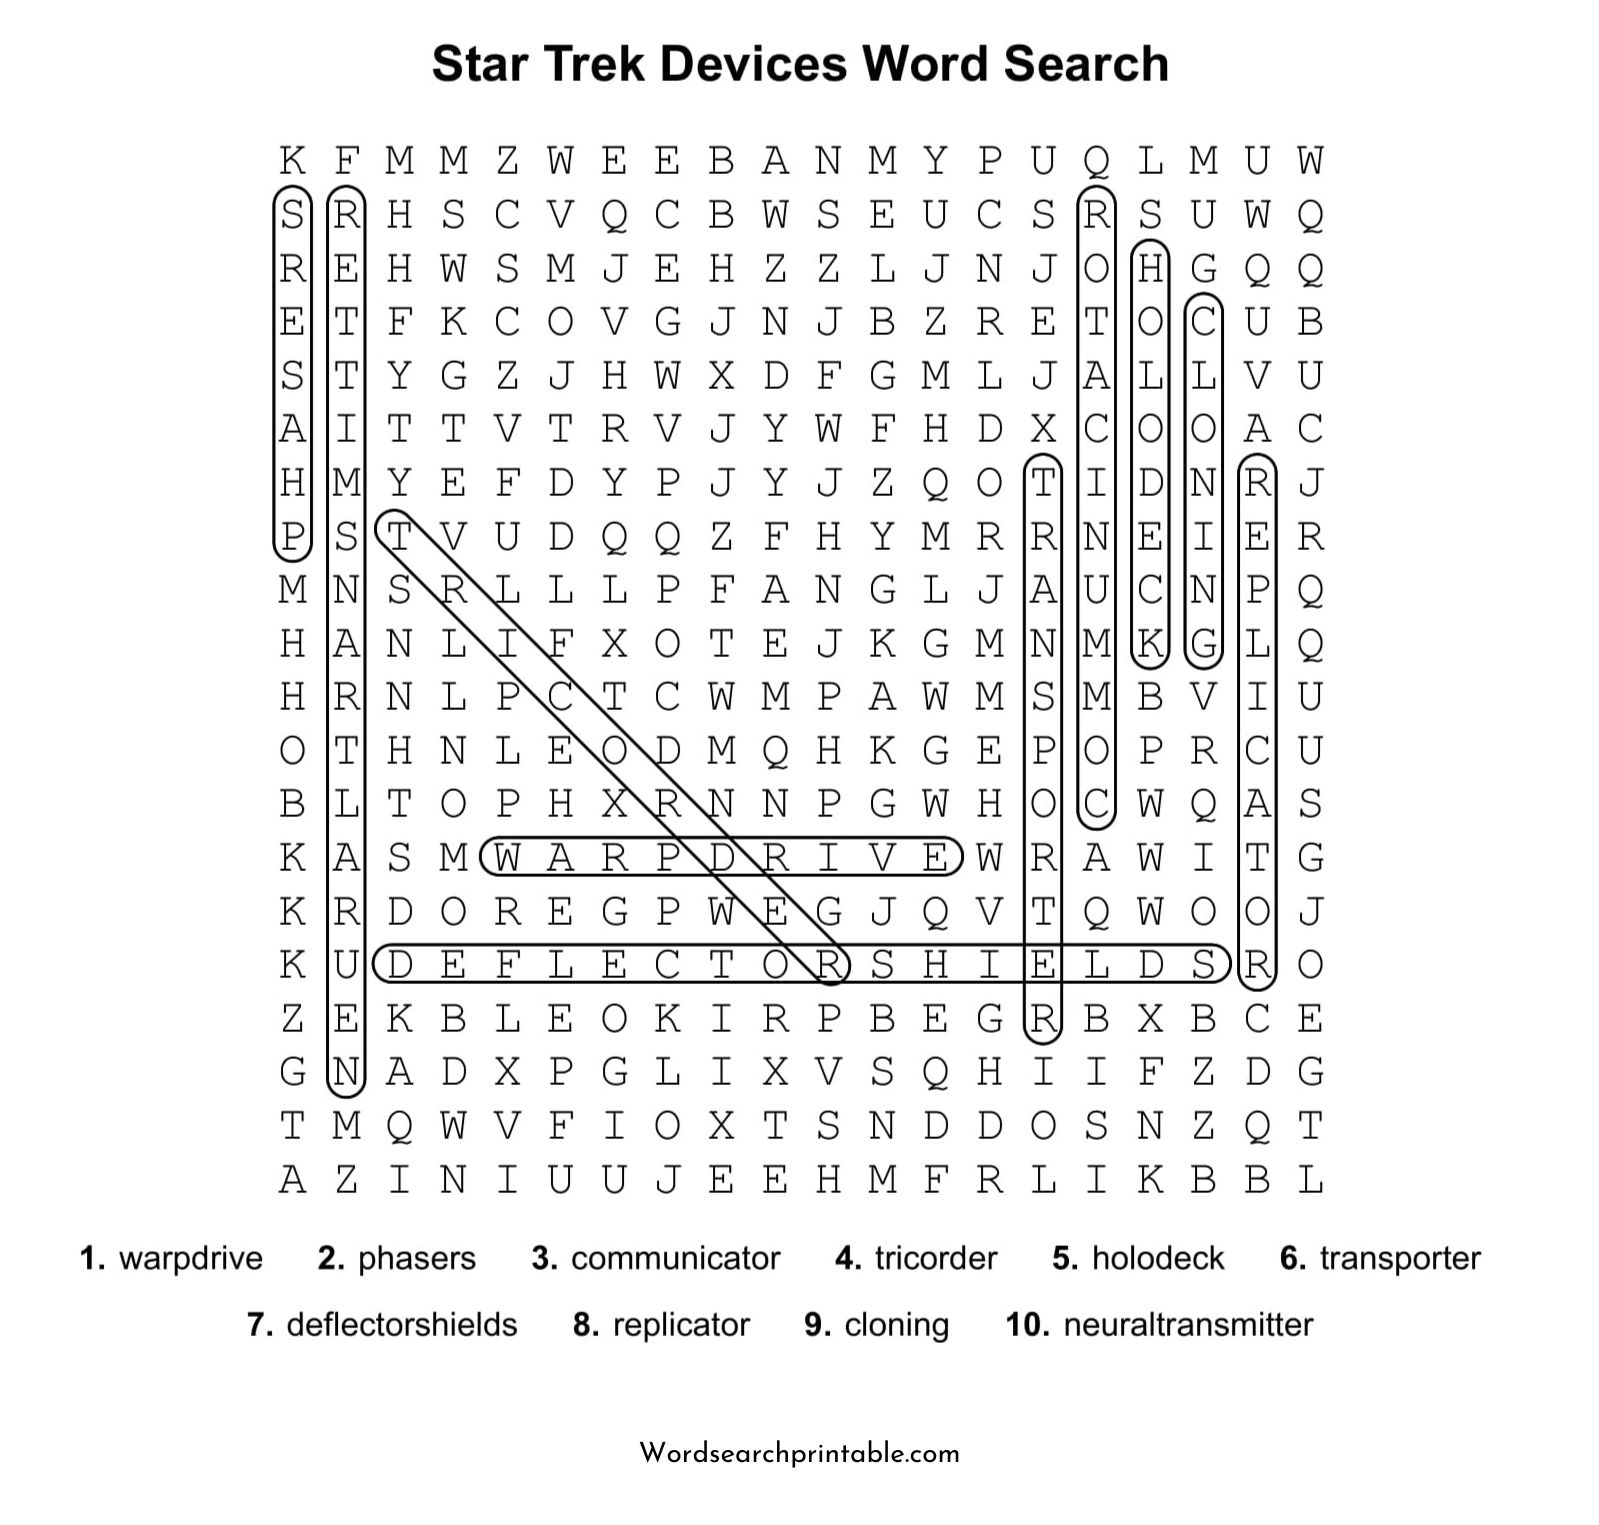 star trek devices word search puzzle solution